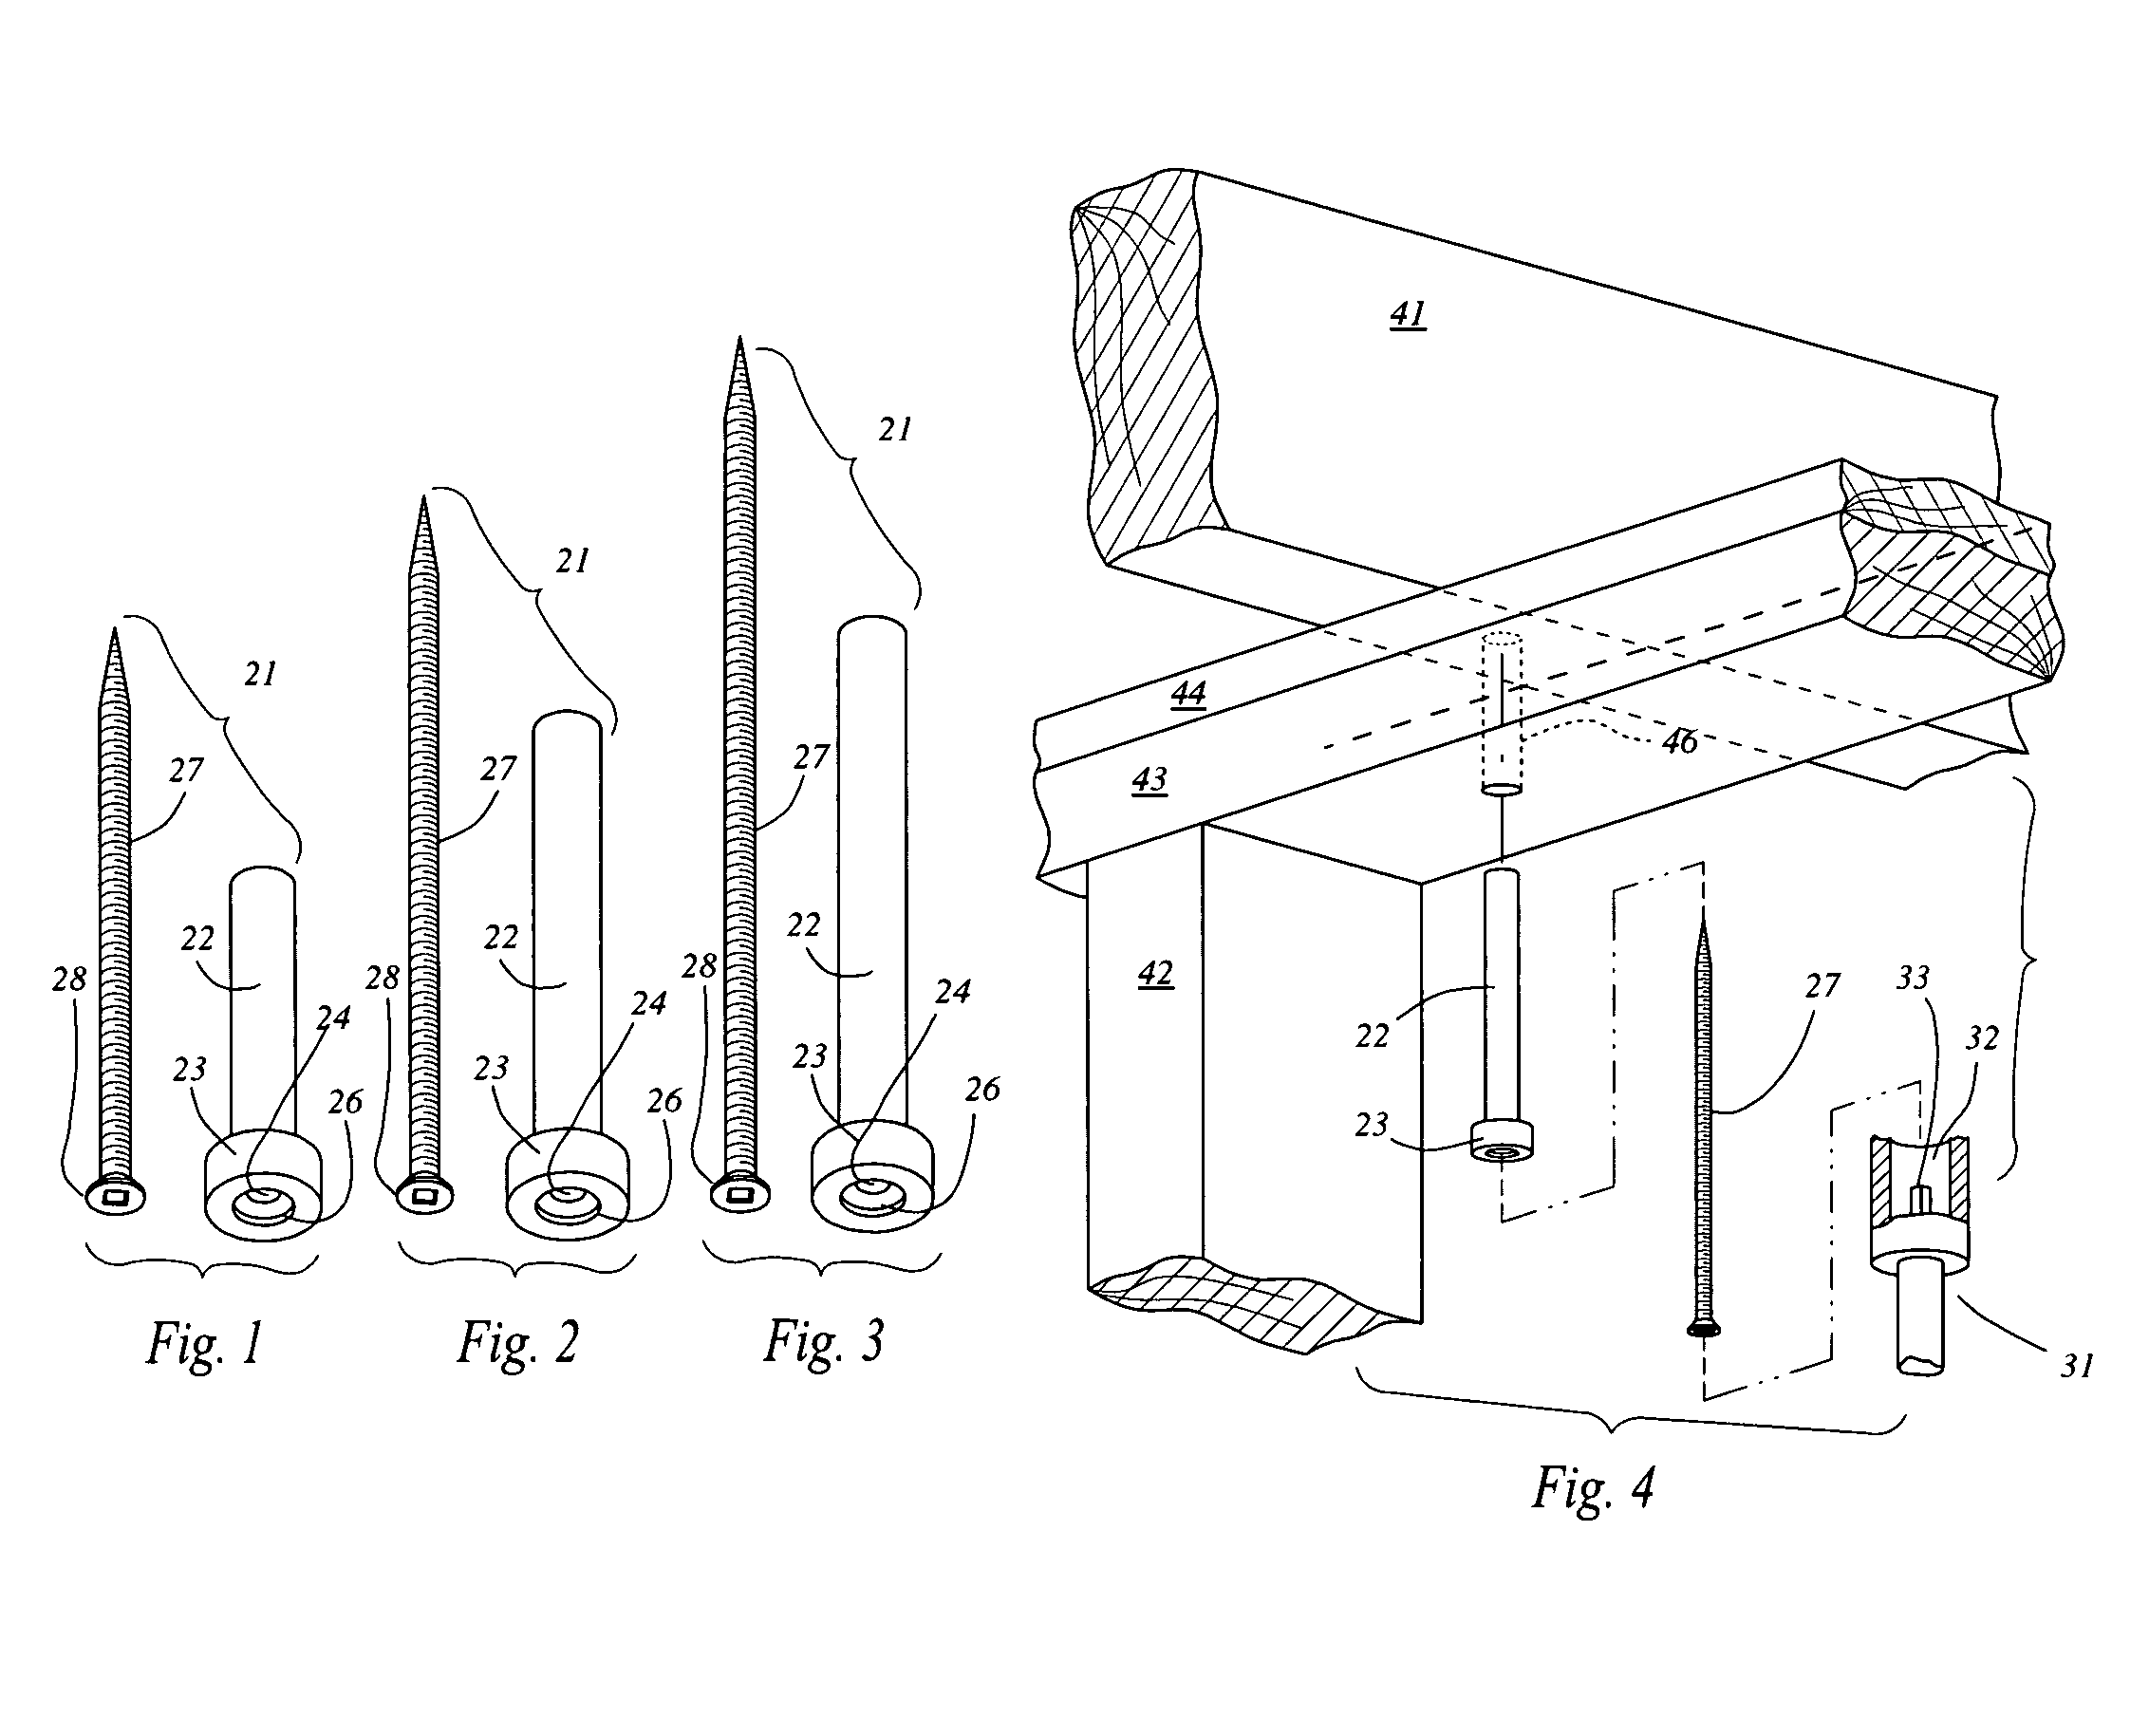 Method and apparatus for securing non-load bearing walls